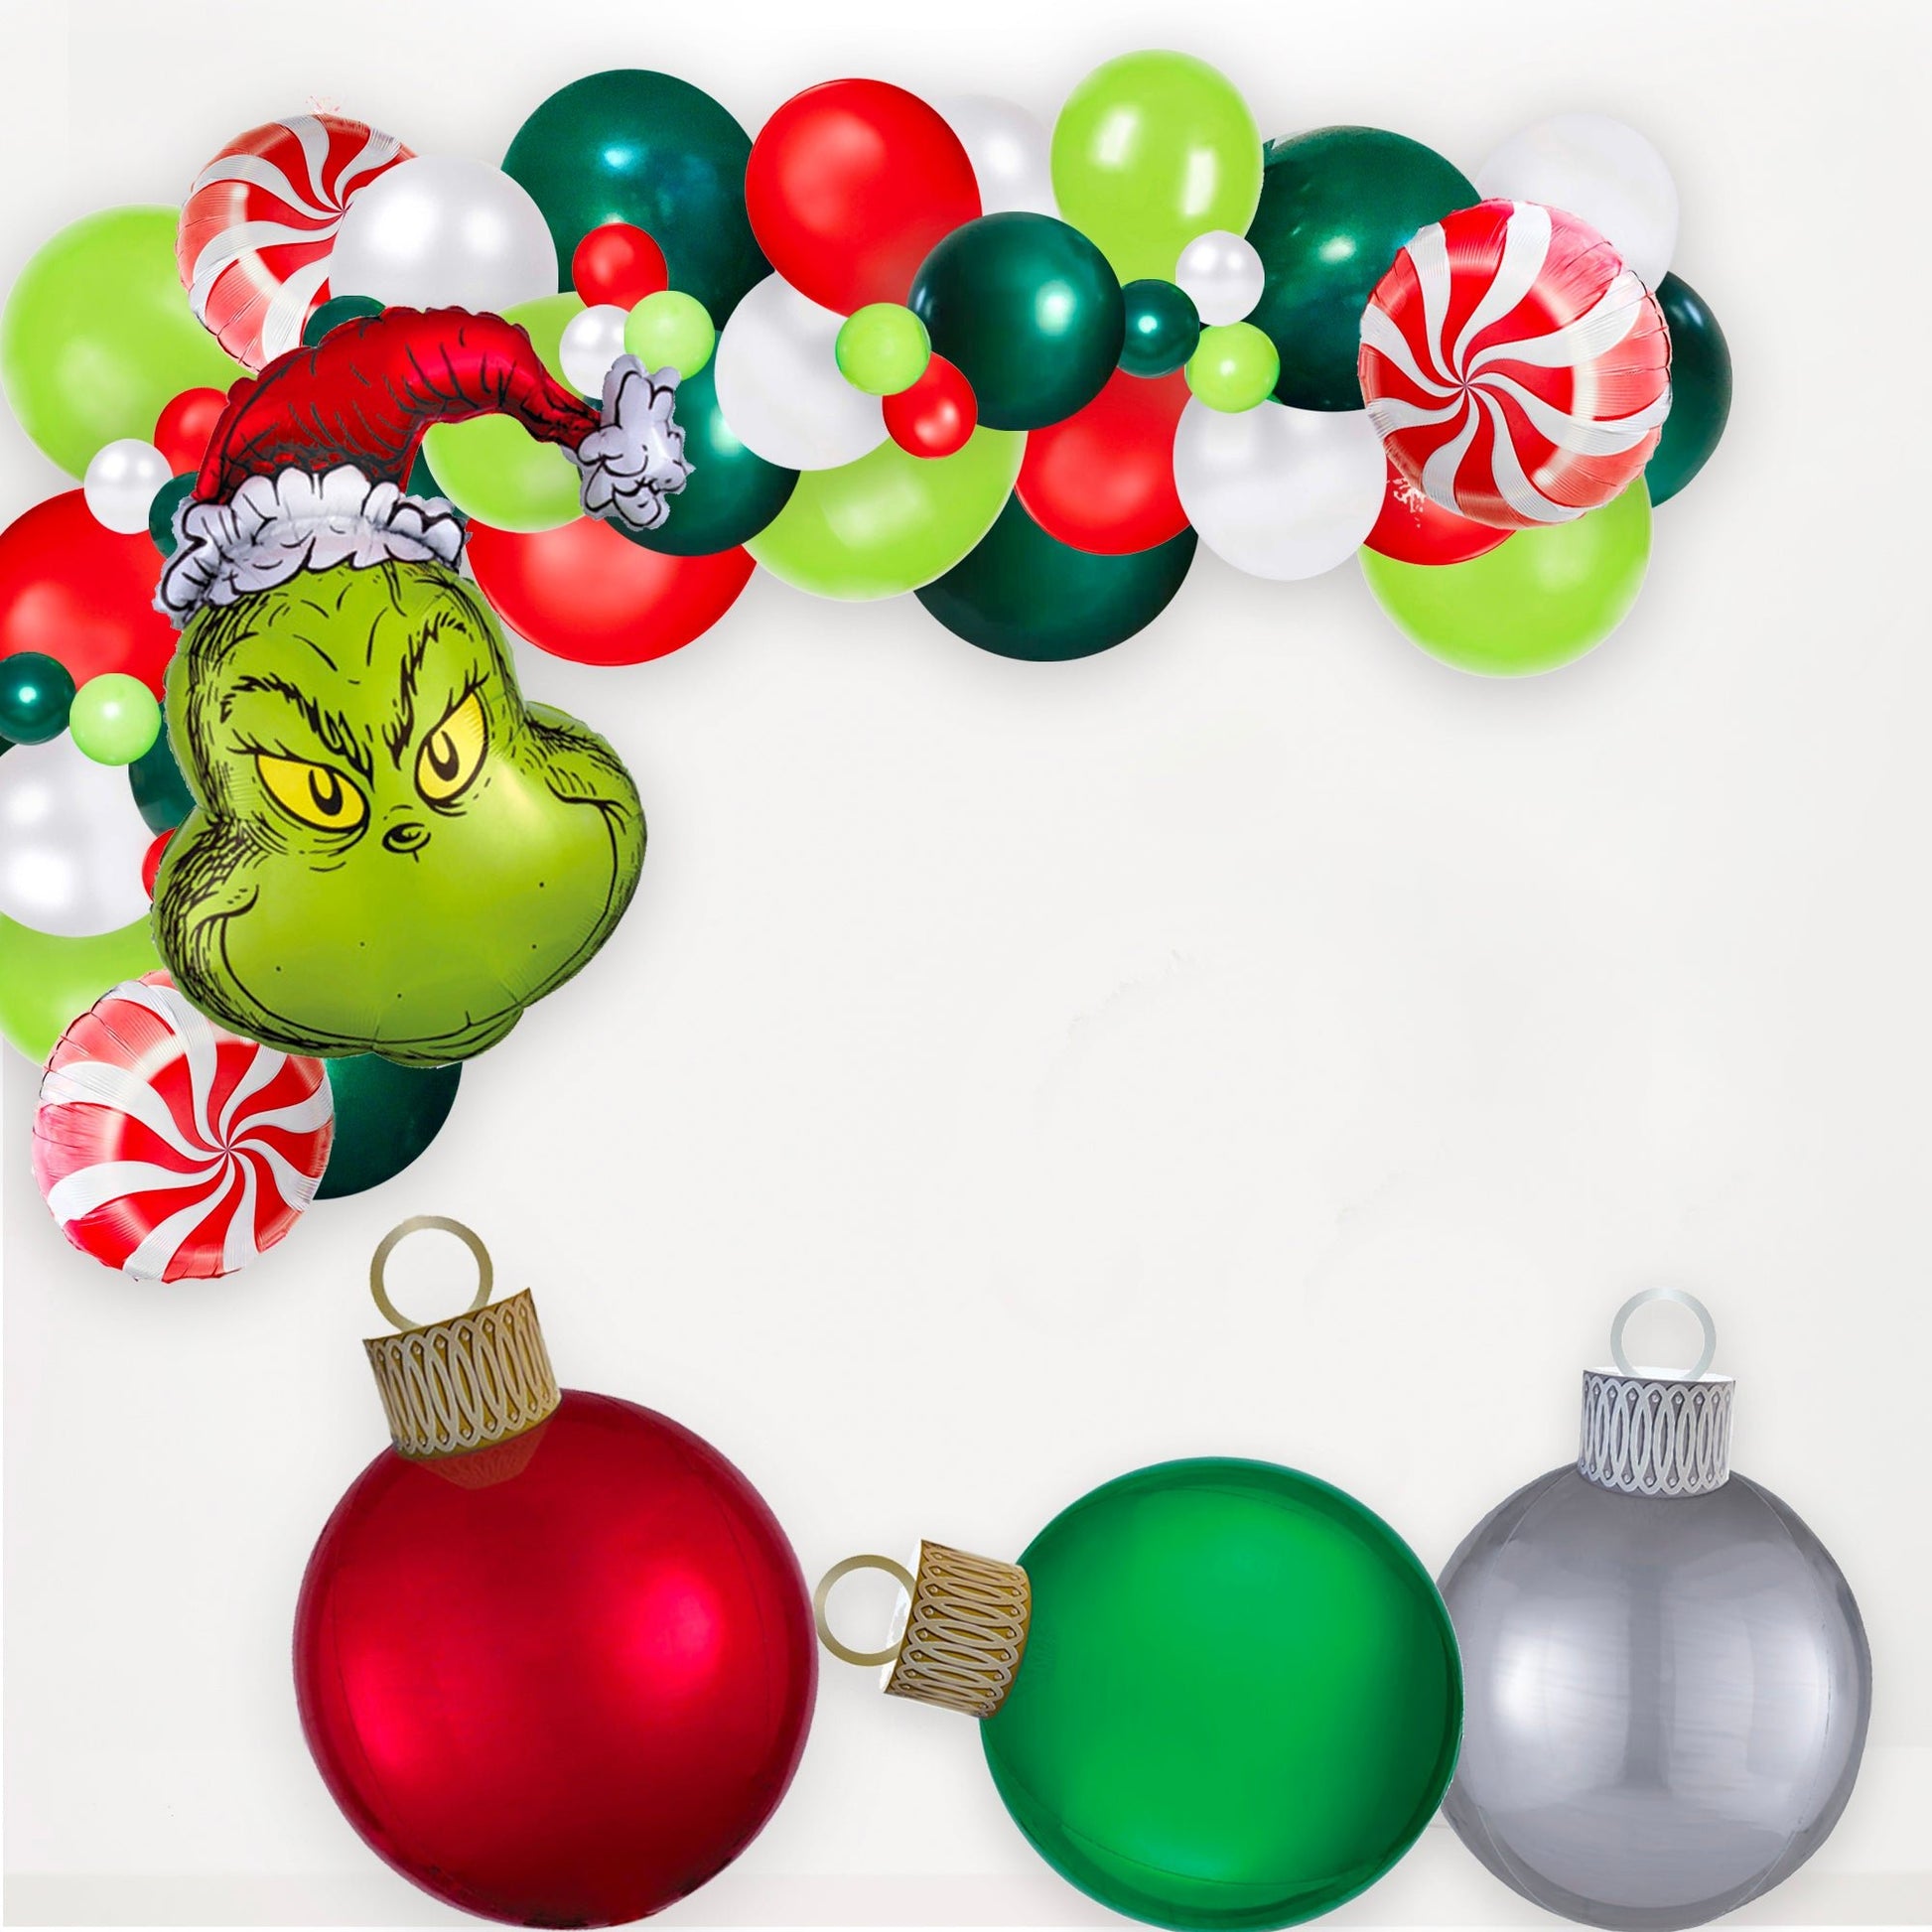 3D Red Christmas Ornament Balloon (20-Inches) - Ellie's Party Supply